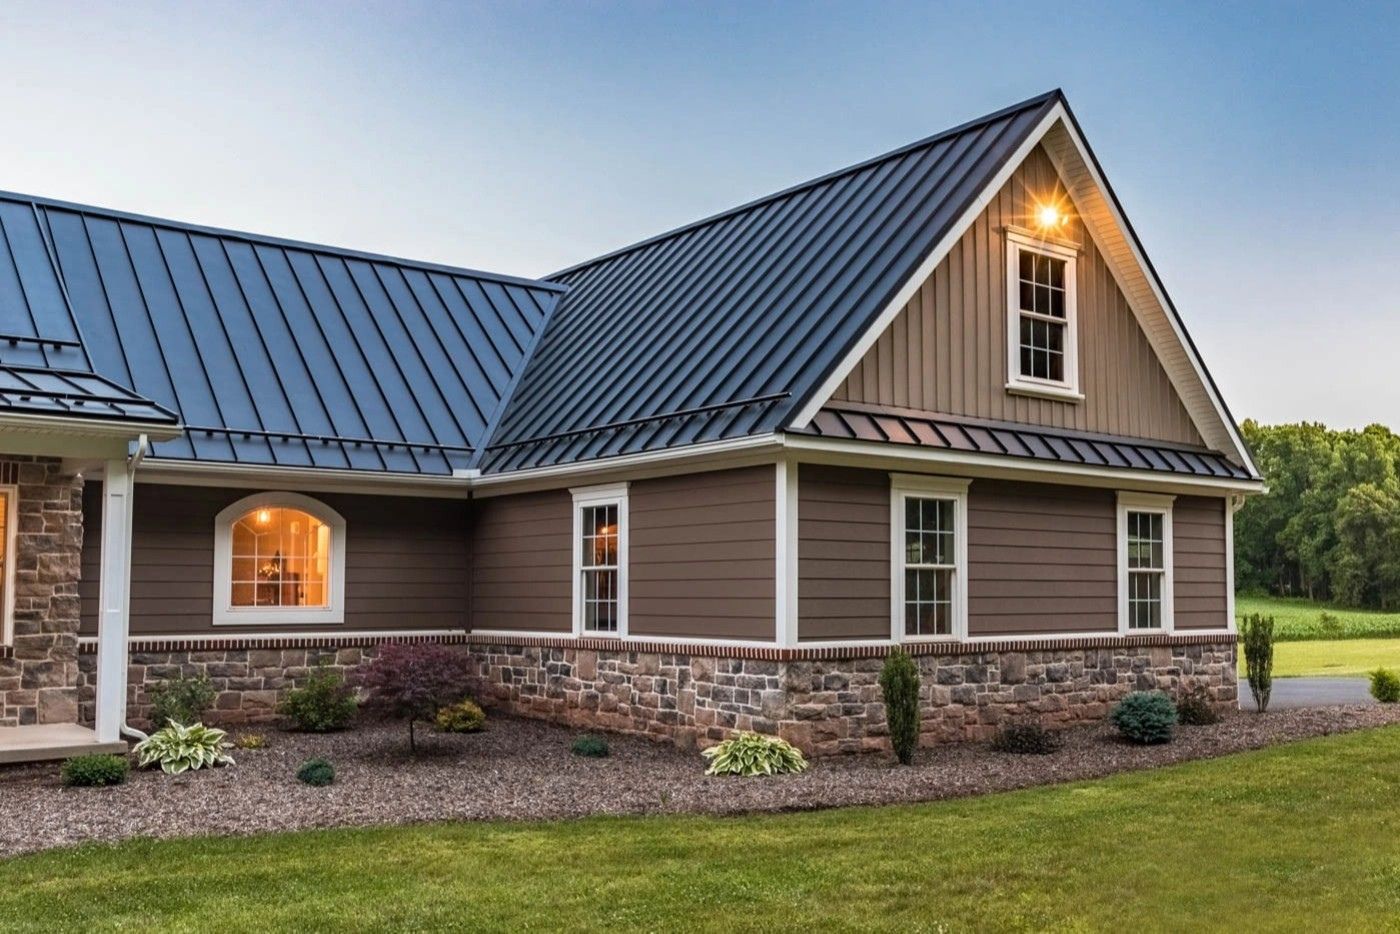 What Is The Cost Of A Metal Roof